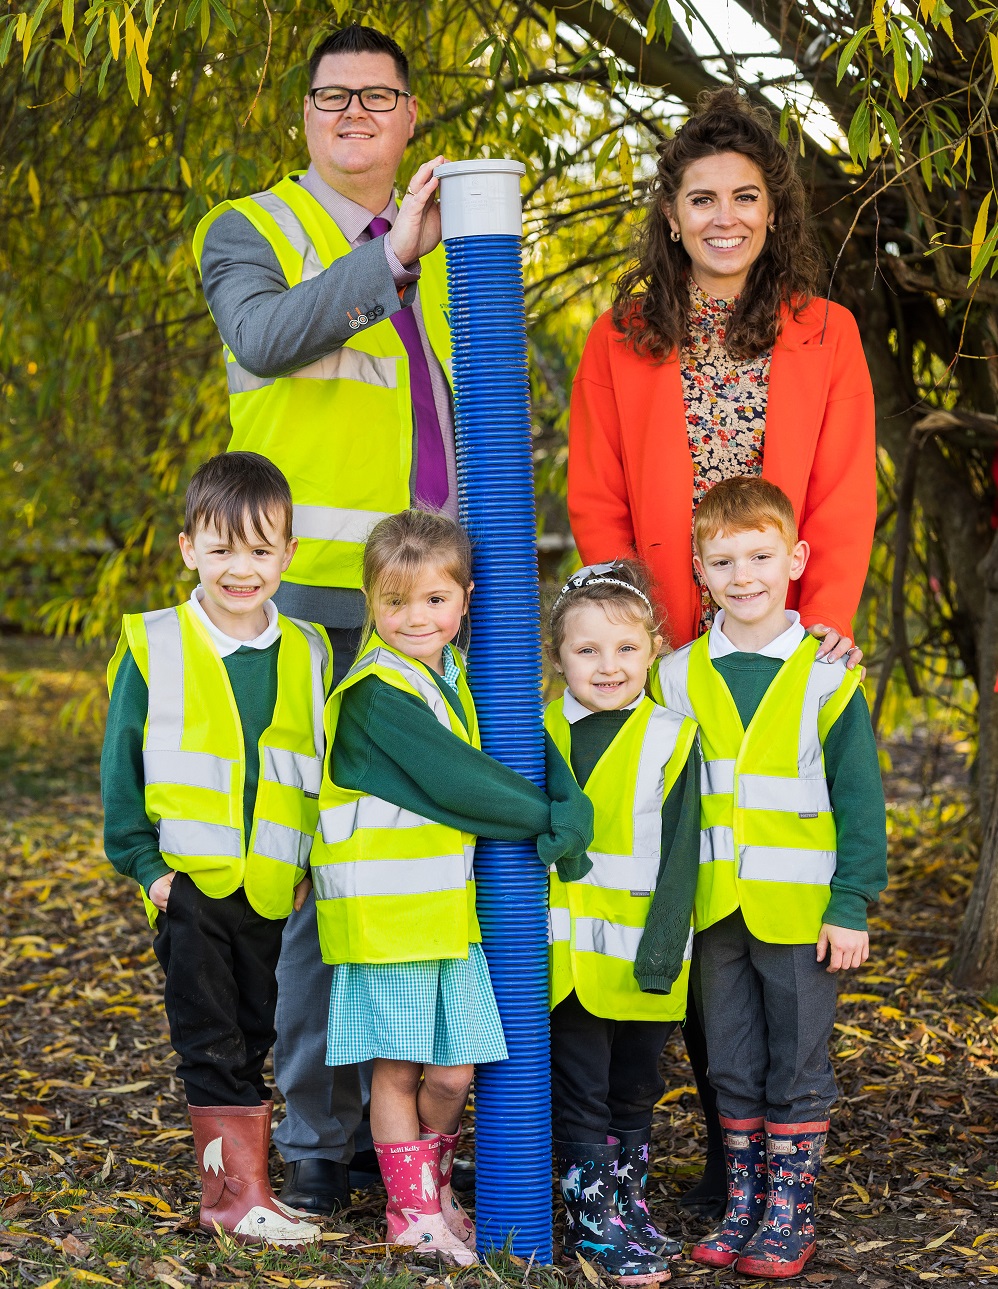 Stewart Milne Homes supports outdoor learning and lights up East Linton community